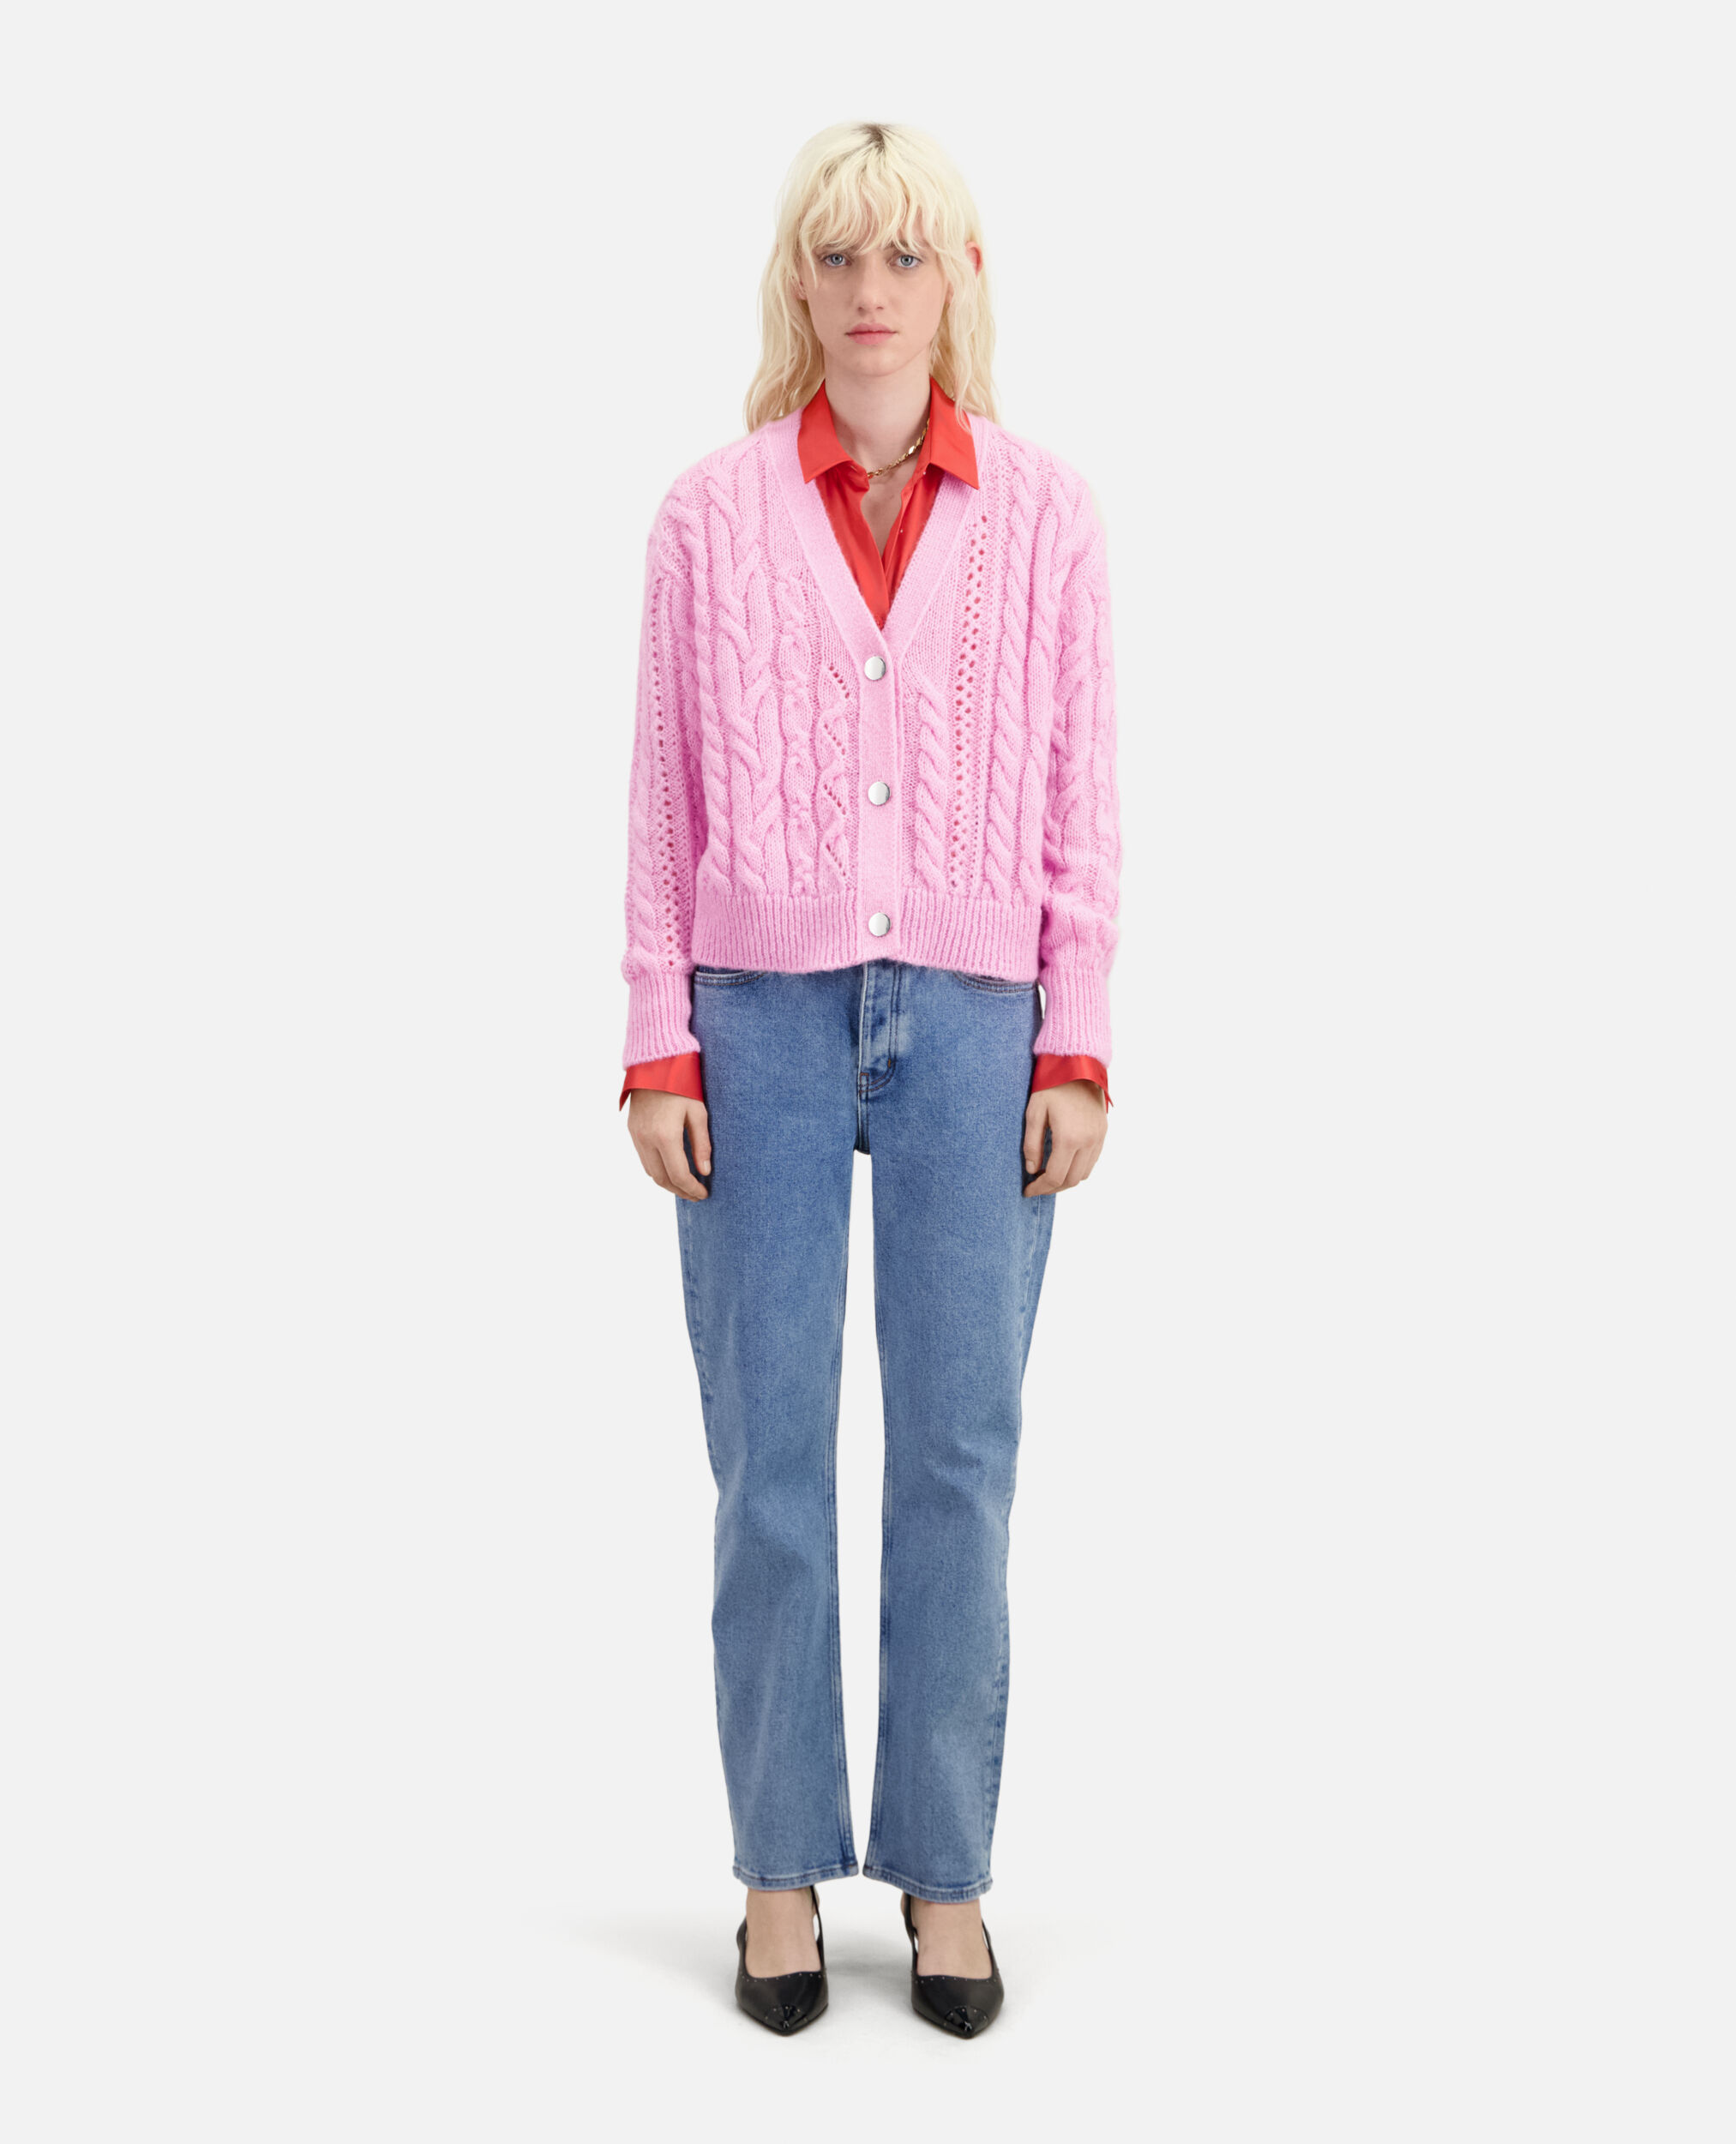 Rosa Cardigan aus Wolle mit Zopfmuster, PINK, hi-res image number null